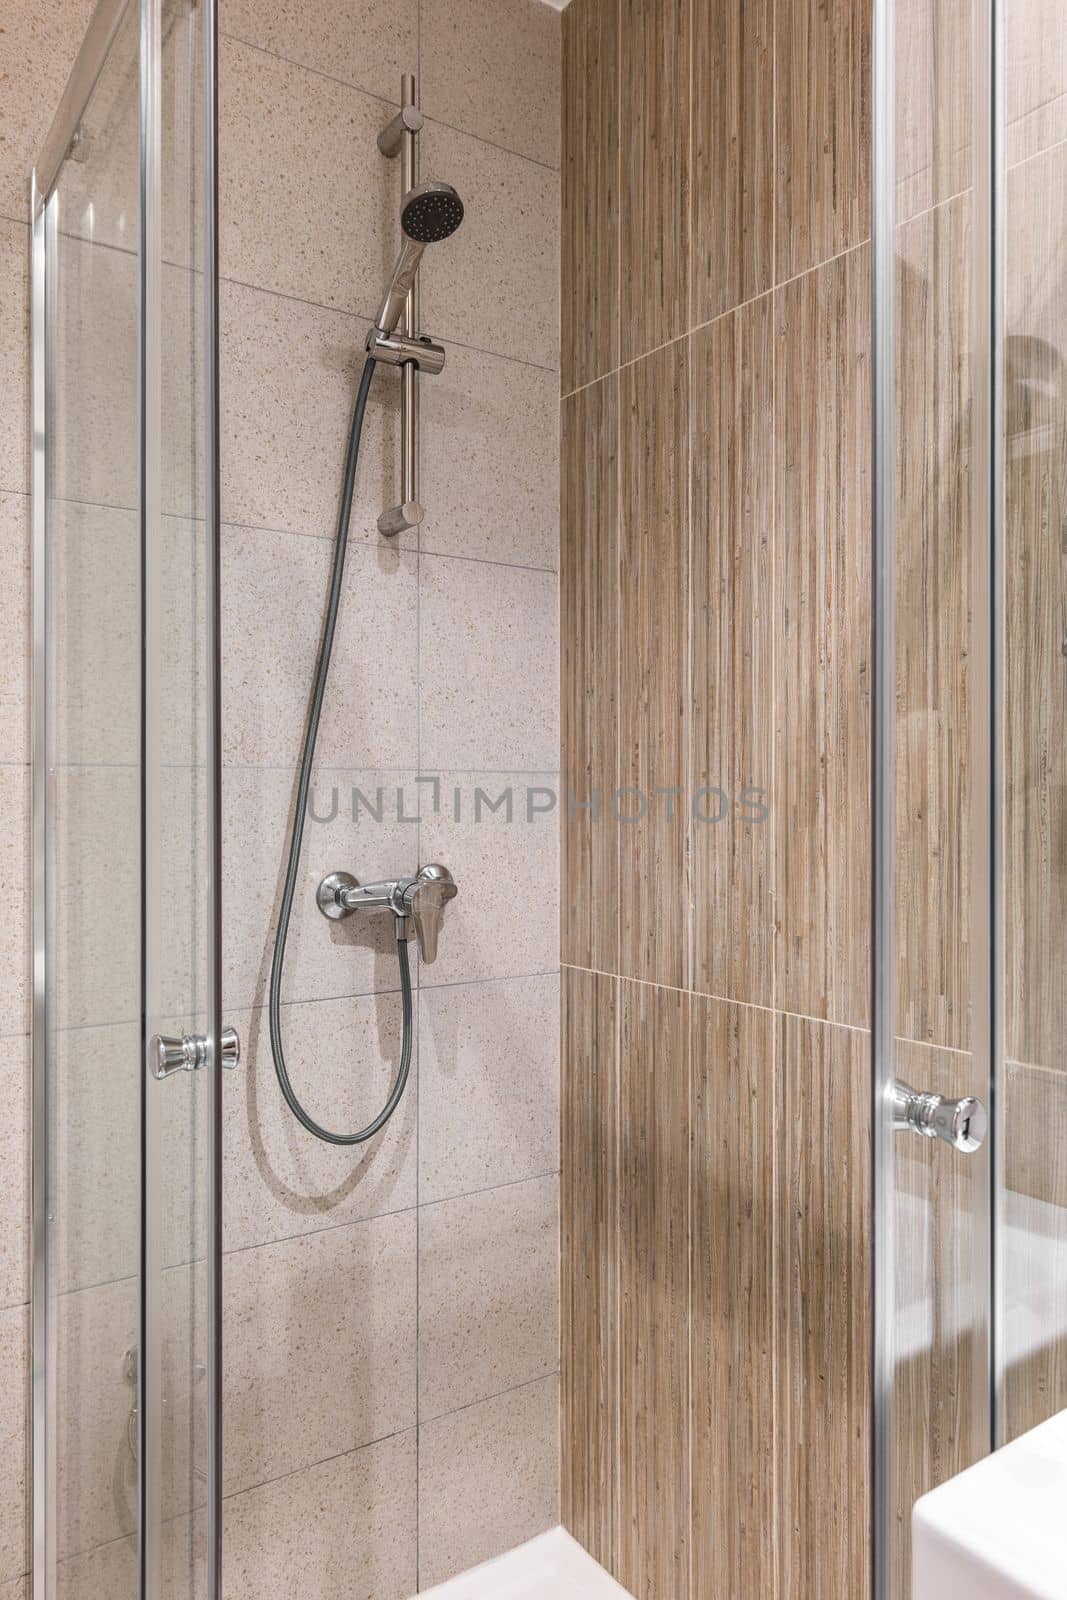 Shower area with marble tiles on the walls. On the wall is a faucet with a long hose and a shower head. Area is fenced with glass doors to protect against splashing water